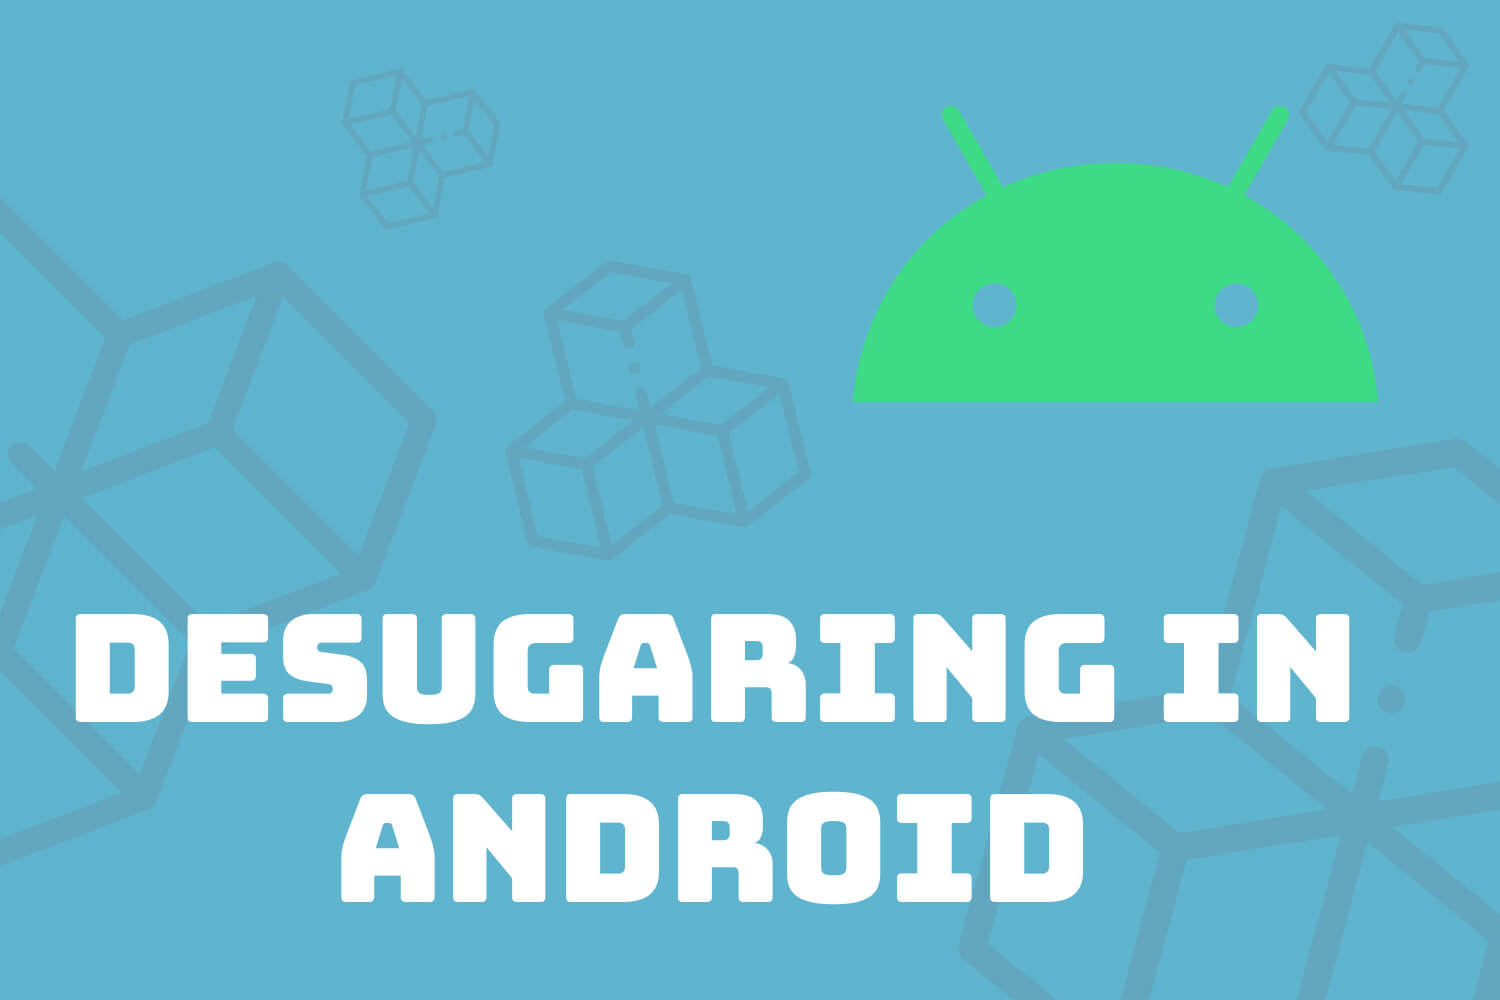 Desugaring in Android